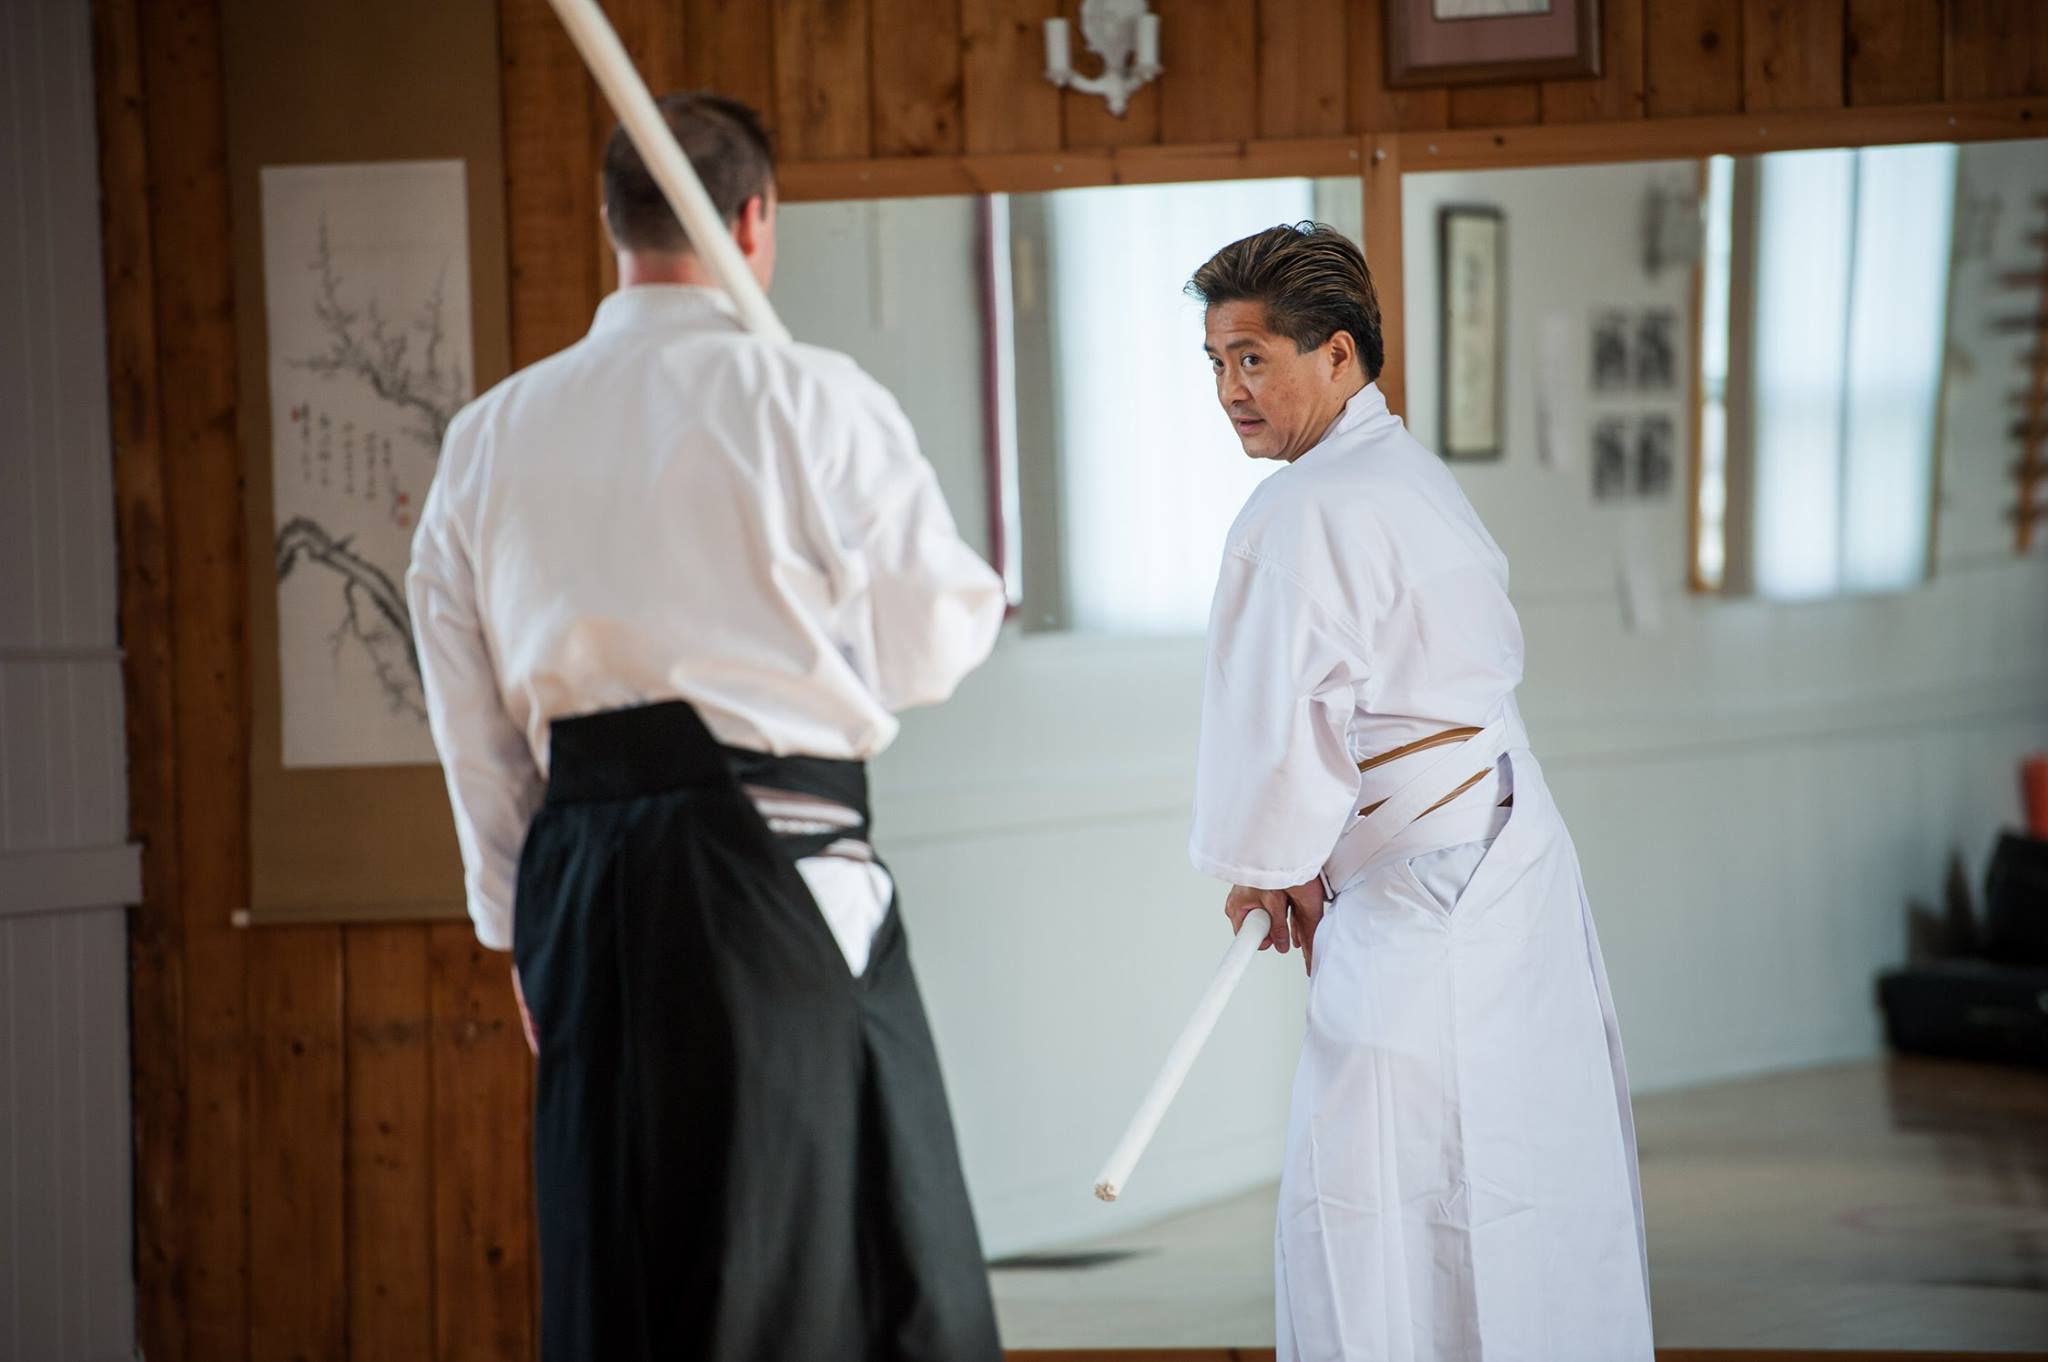 Teaching in traditional budo is heart-to-heart: Tong Sensei instructs Kyle on the nuances of a technique